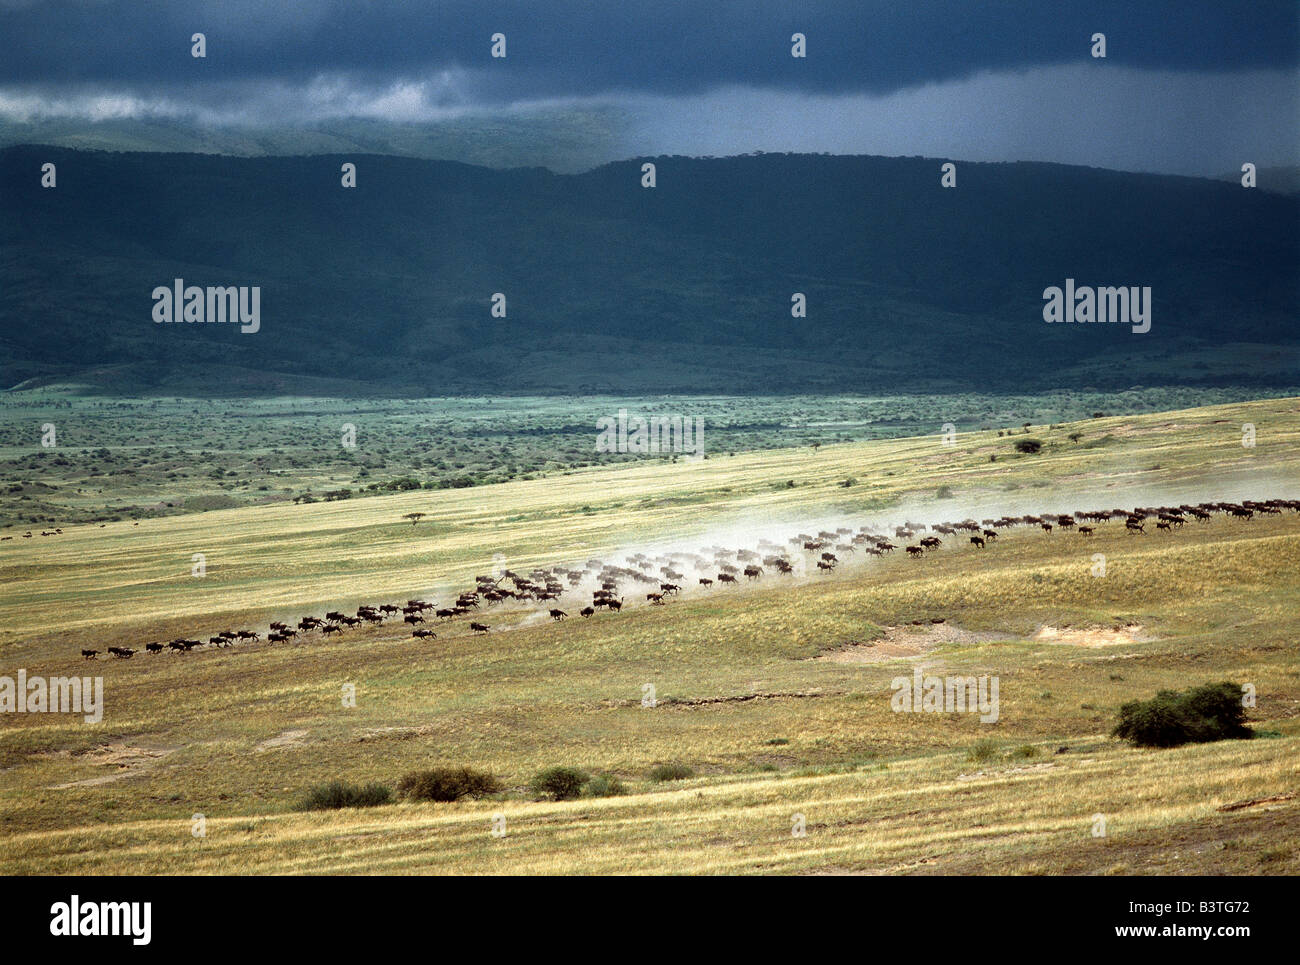 Tanzania, Northern Tanzania, Serengeti. Wildebeest stampede on the dry grassy plains on the west side of the Ngorongoro Highlands. Stock Photo